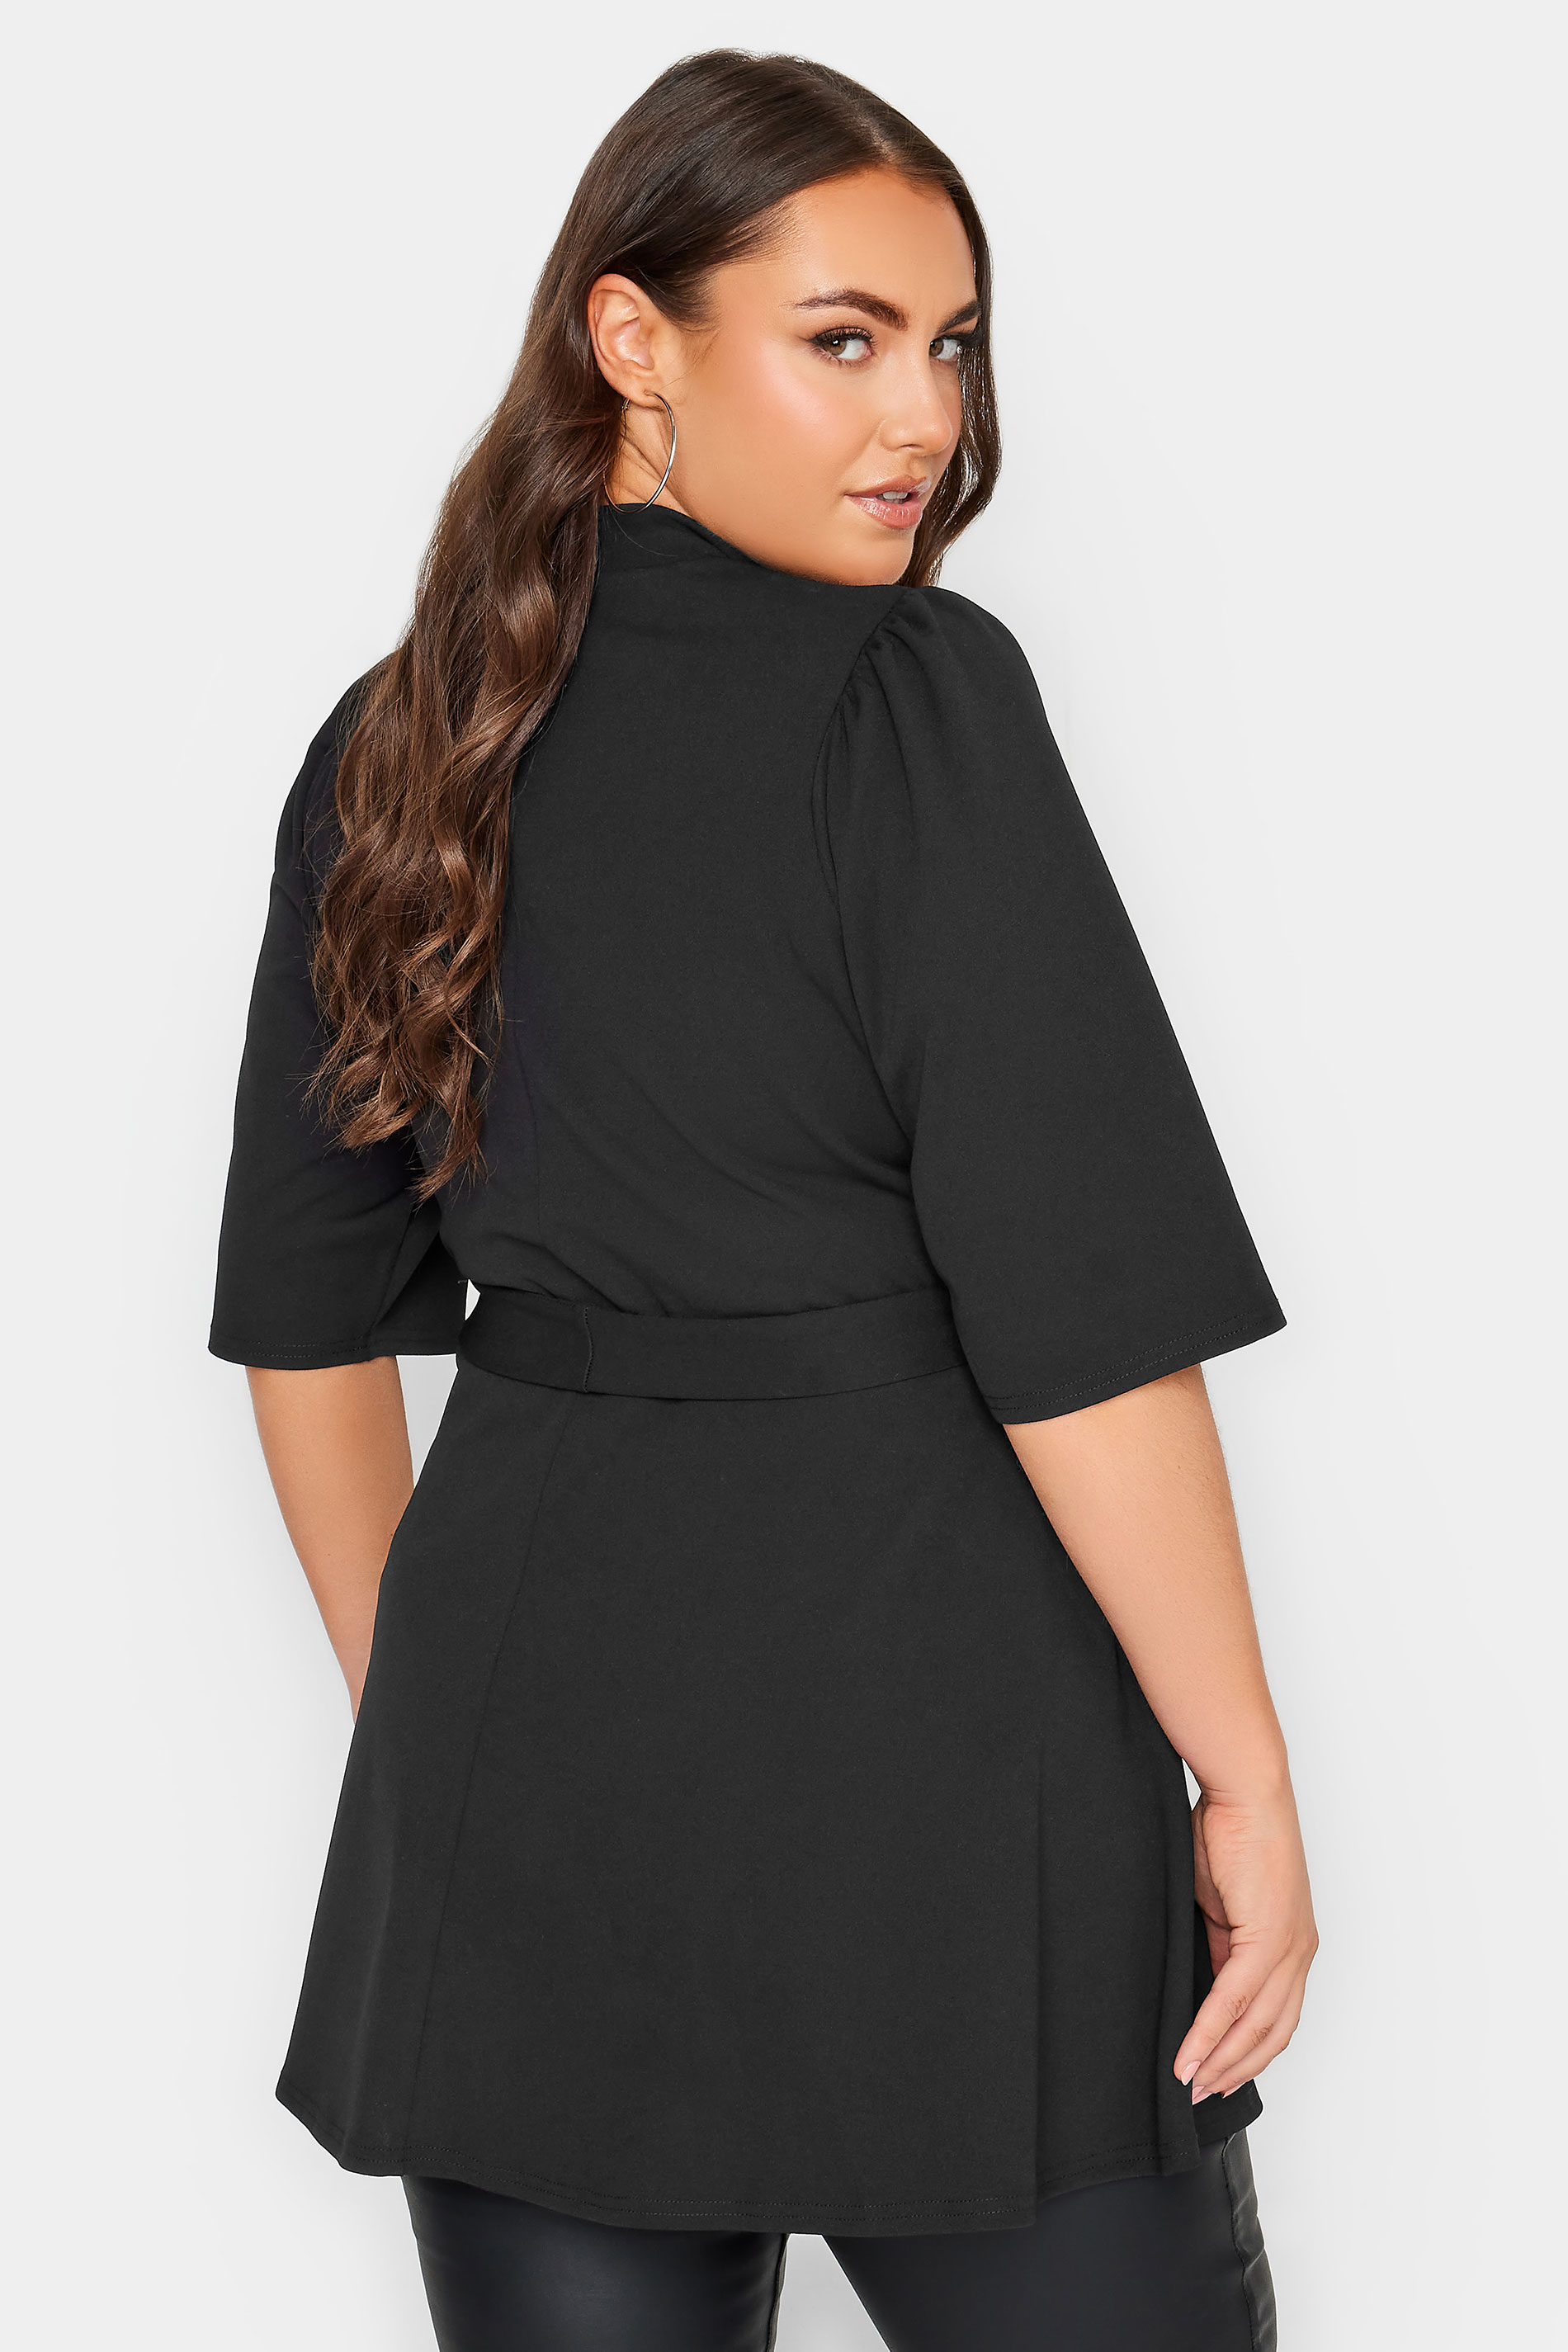 YOURS LONDON Plus Size Black Cut Out Detail Peplum Top | Yours Clothing 3